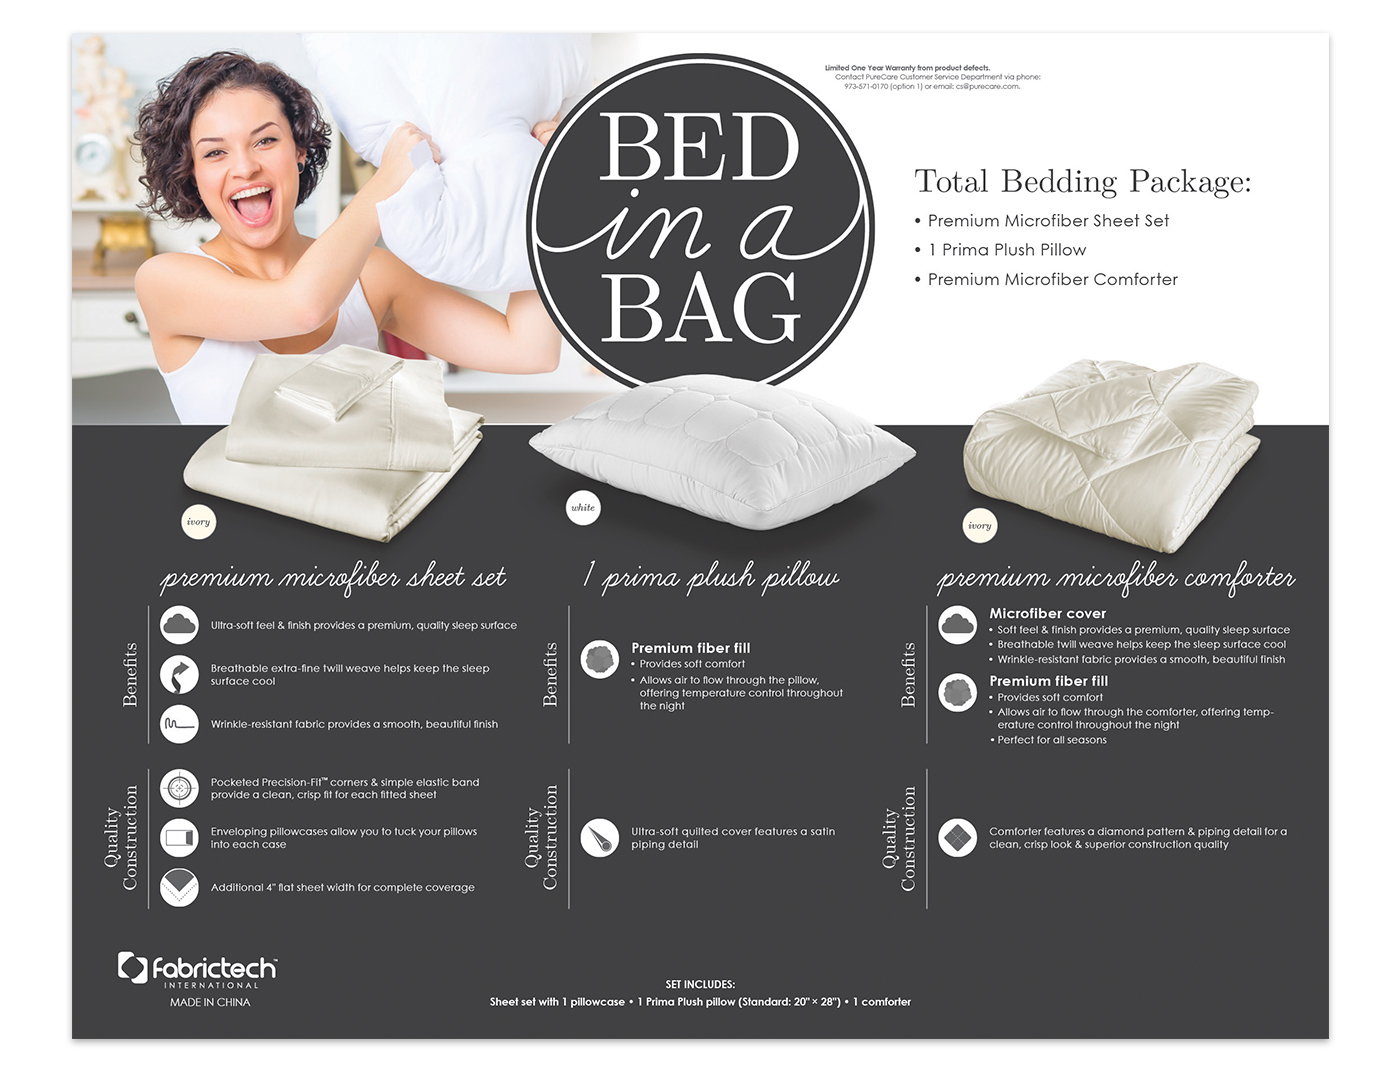 Bed-In-A-Bag bedding PureCare Fabrictech Packaging tear sheet set bed sleep lifestyle